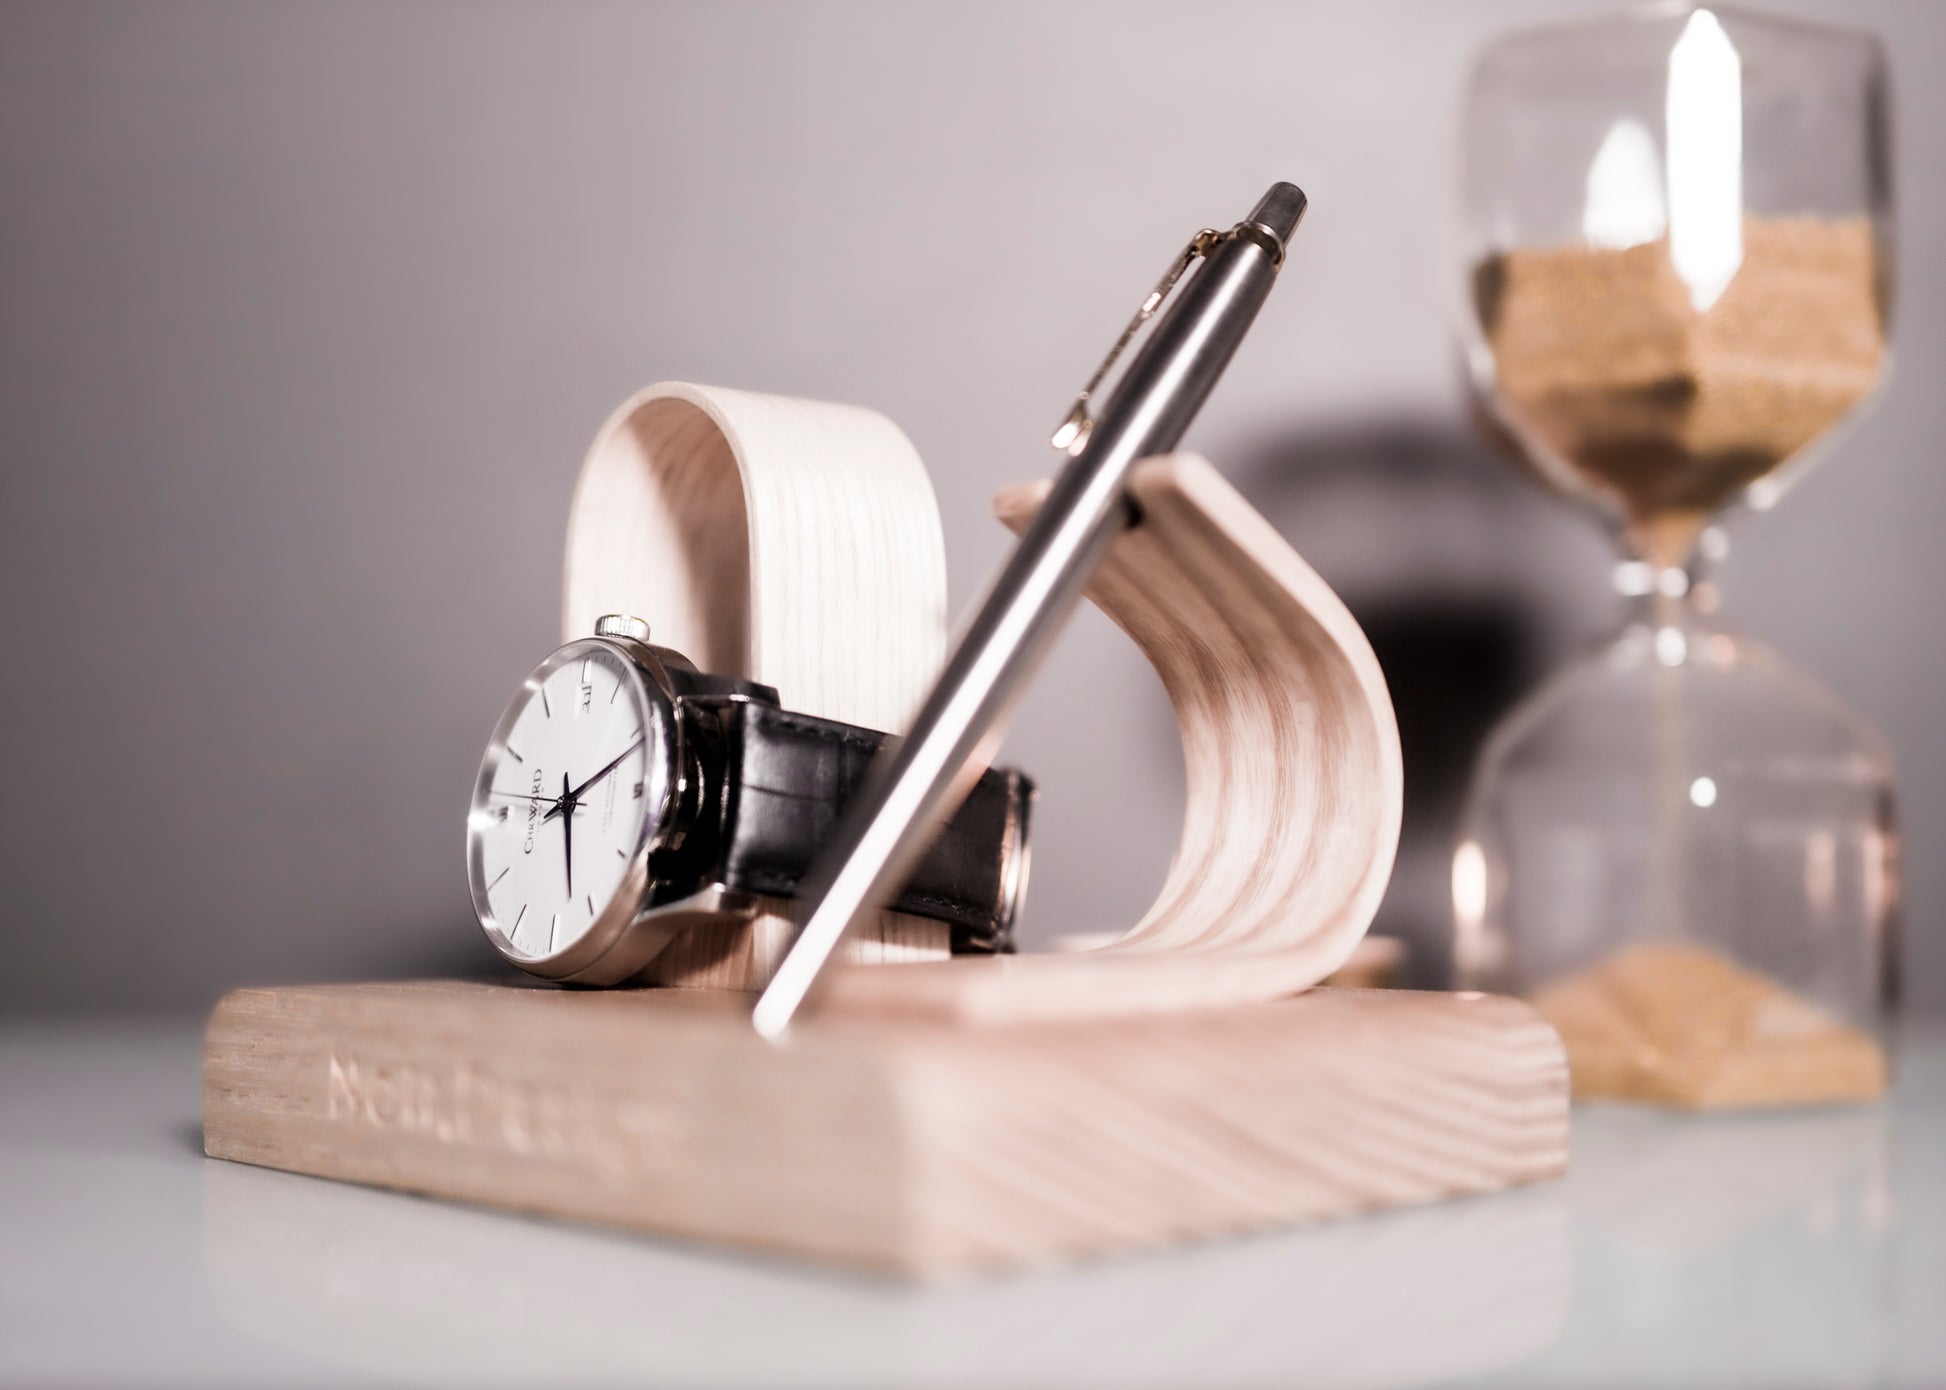 watch stand with pen holder - made from Ash by Noir.Design